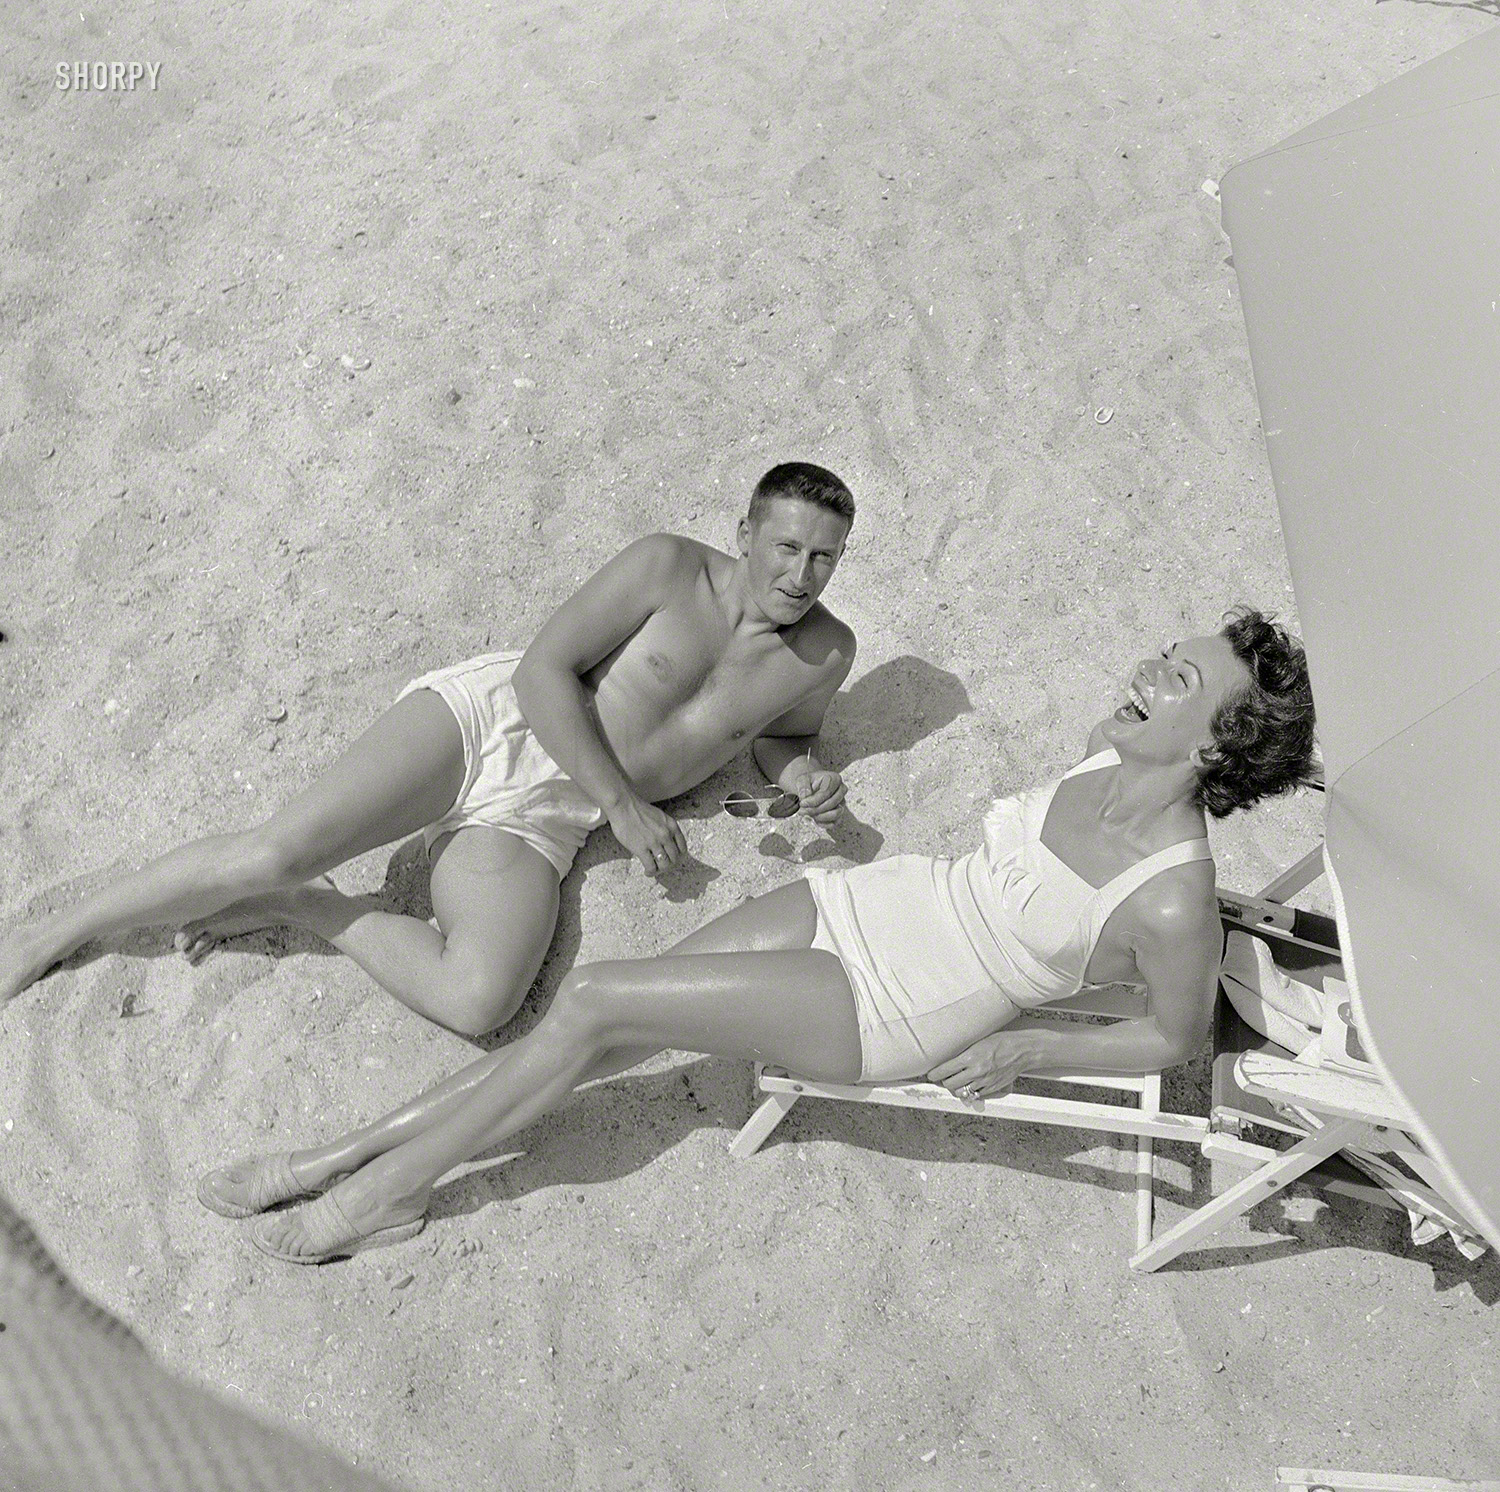 June 1953. "Activities at the Sun Fun Festival, Myrtle Beach, South Carolina. Mickey Spillane, one of the beauty pageant judges, on the beach with a woman." From photos by Jim Hansen for the Look magazine assignment "Behind the Scenes -- Beauty and the Beach." View full size.